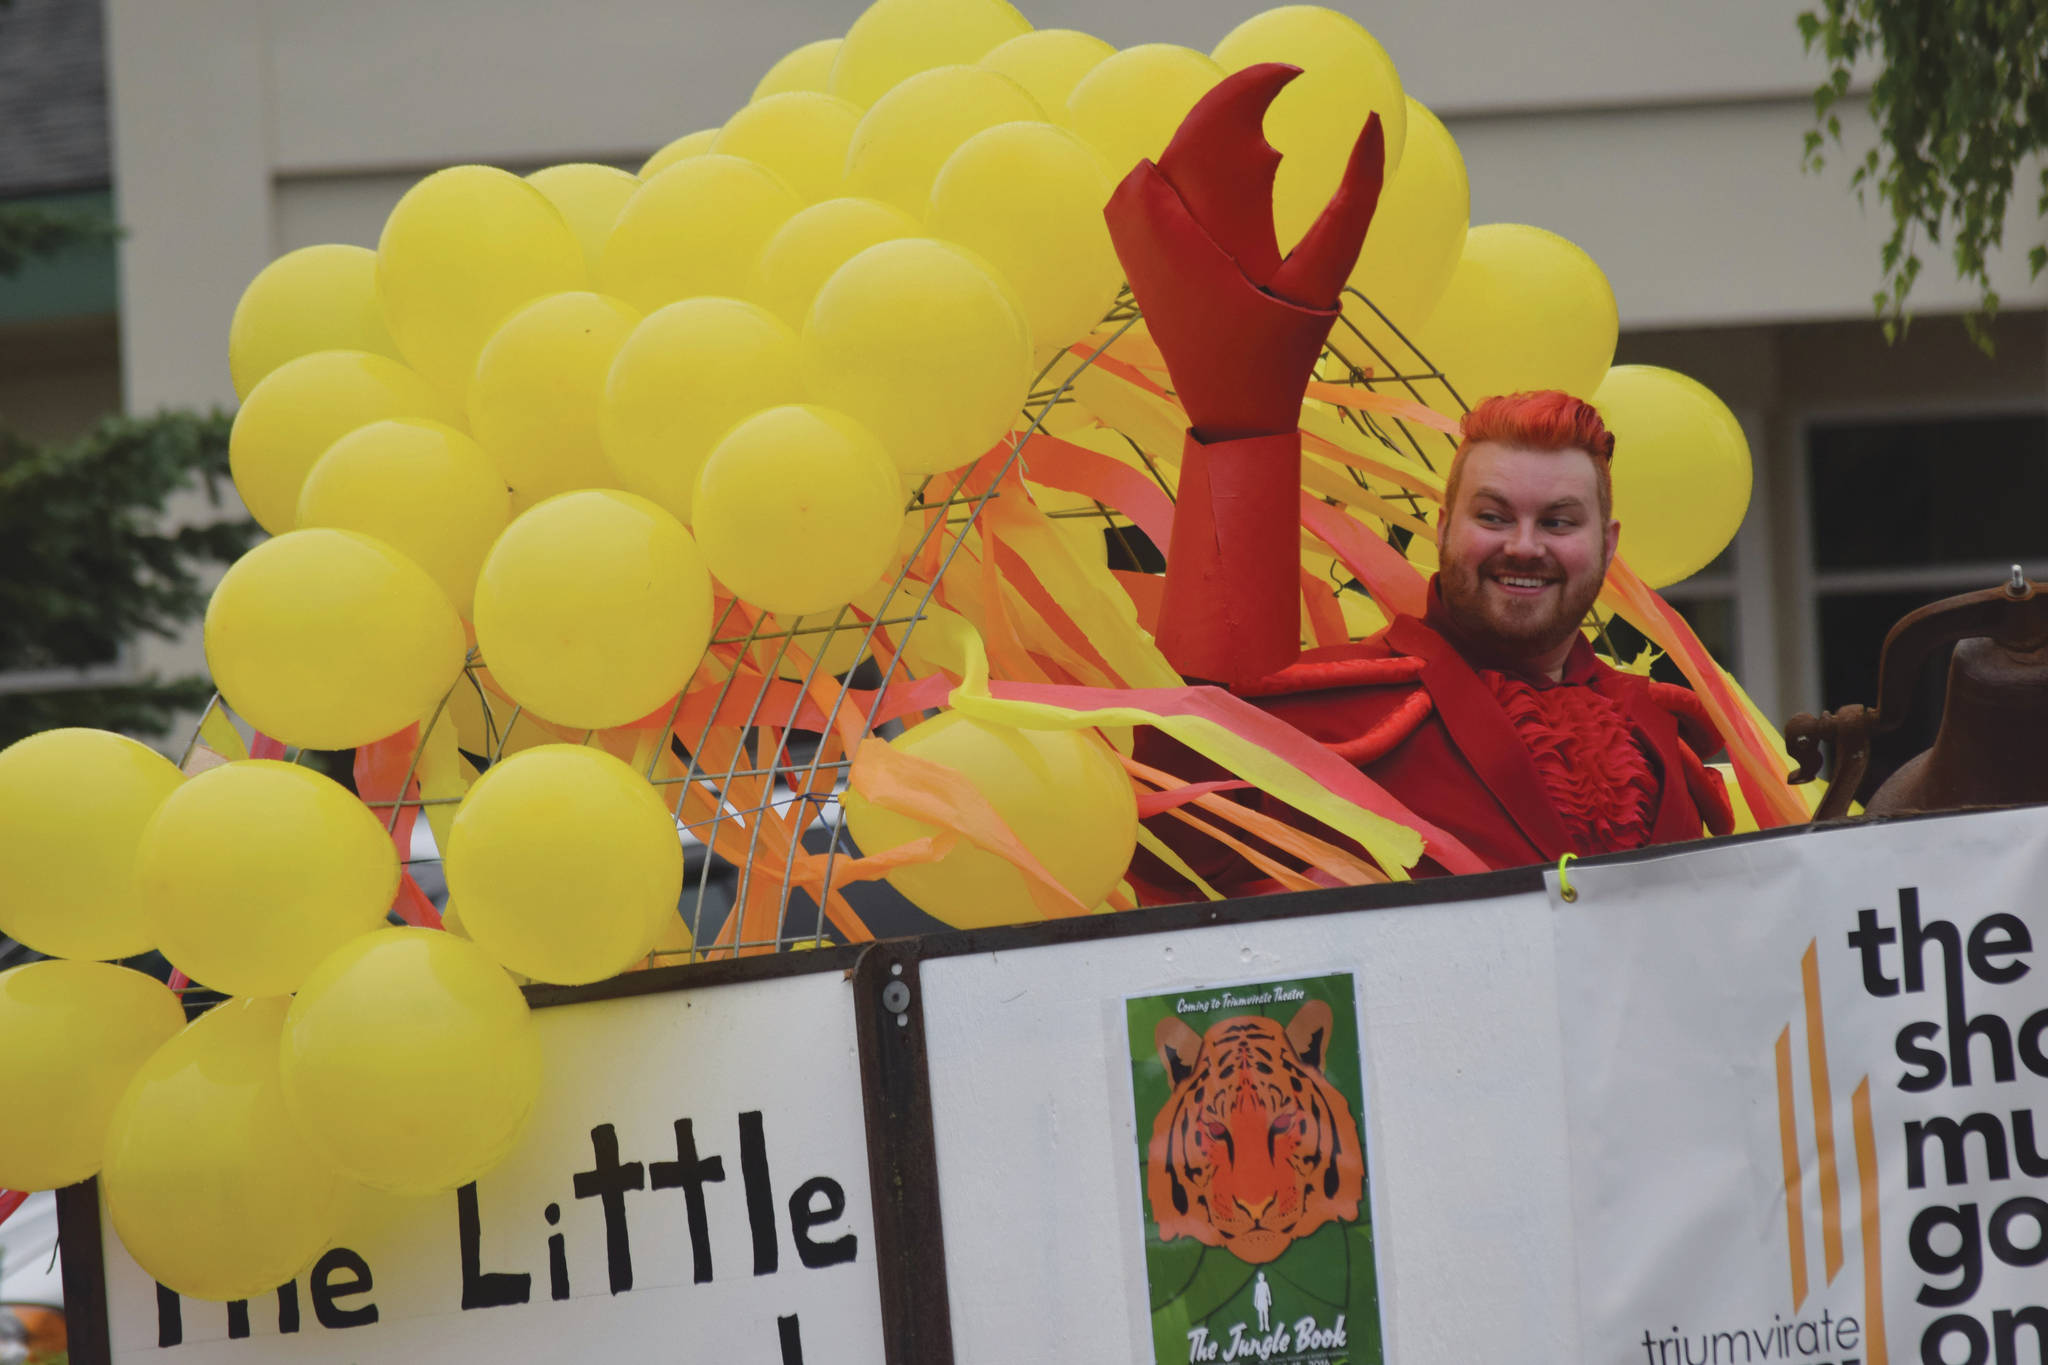 Camille Botello / Peninsula Clarion 
Characters from the “Little Mermaid” wave to the crowd from the Triumvirate Theatre float during the Soldotna Progress Days parade on Saturday in Soldotna. This is the first year the Progress Days festival expanded to take place over four days.